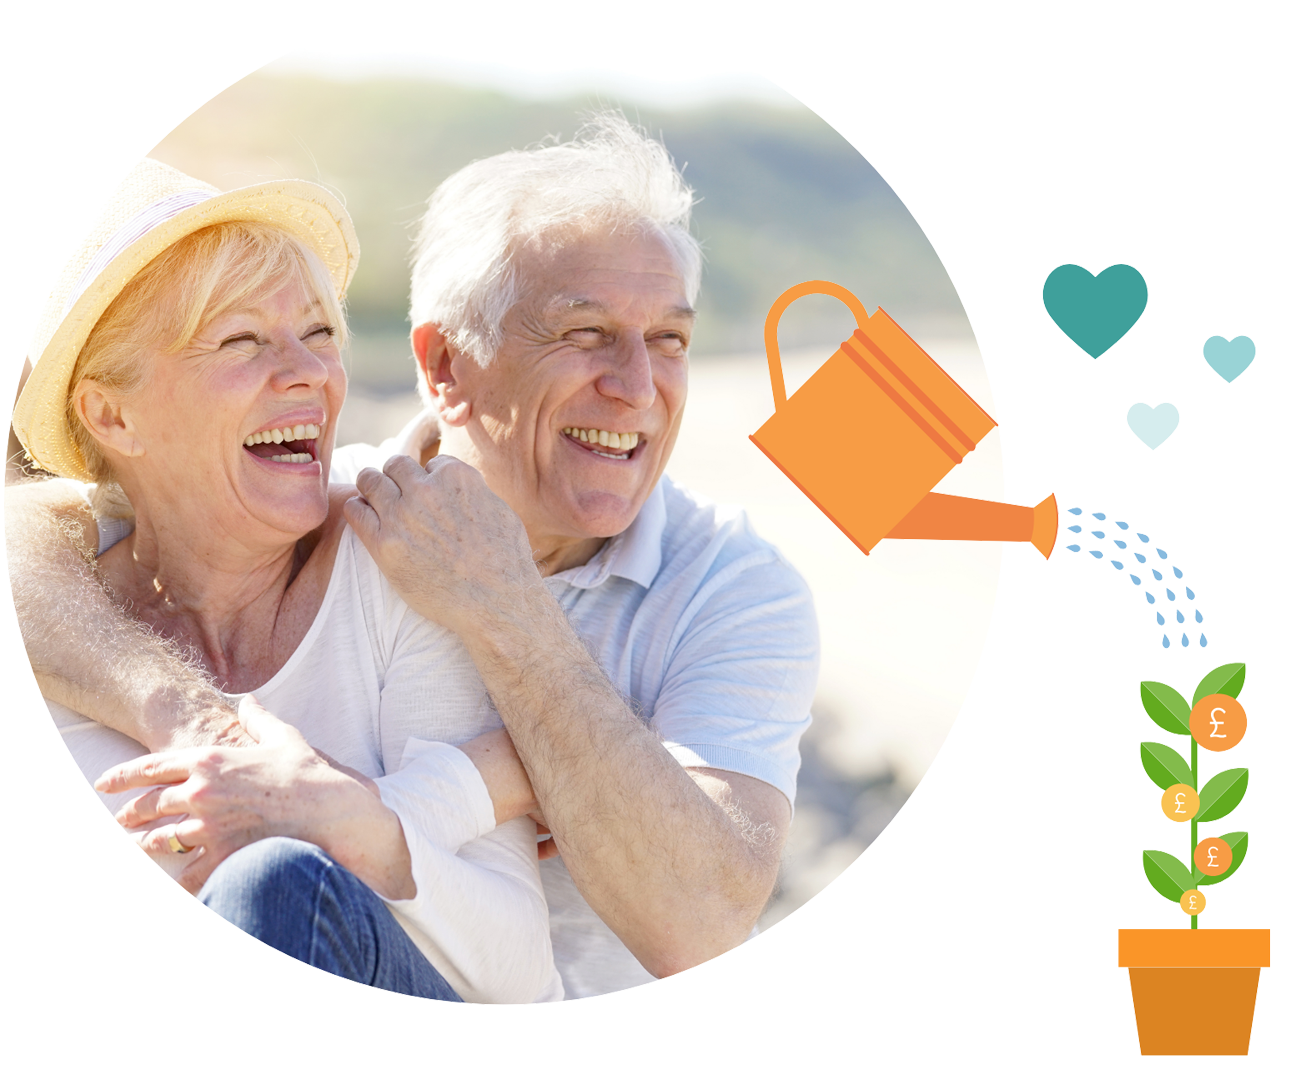 Image showing a happy retired couple